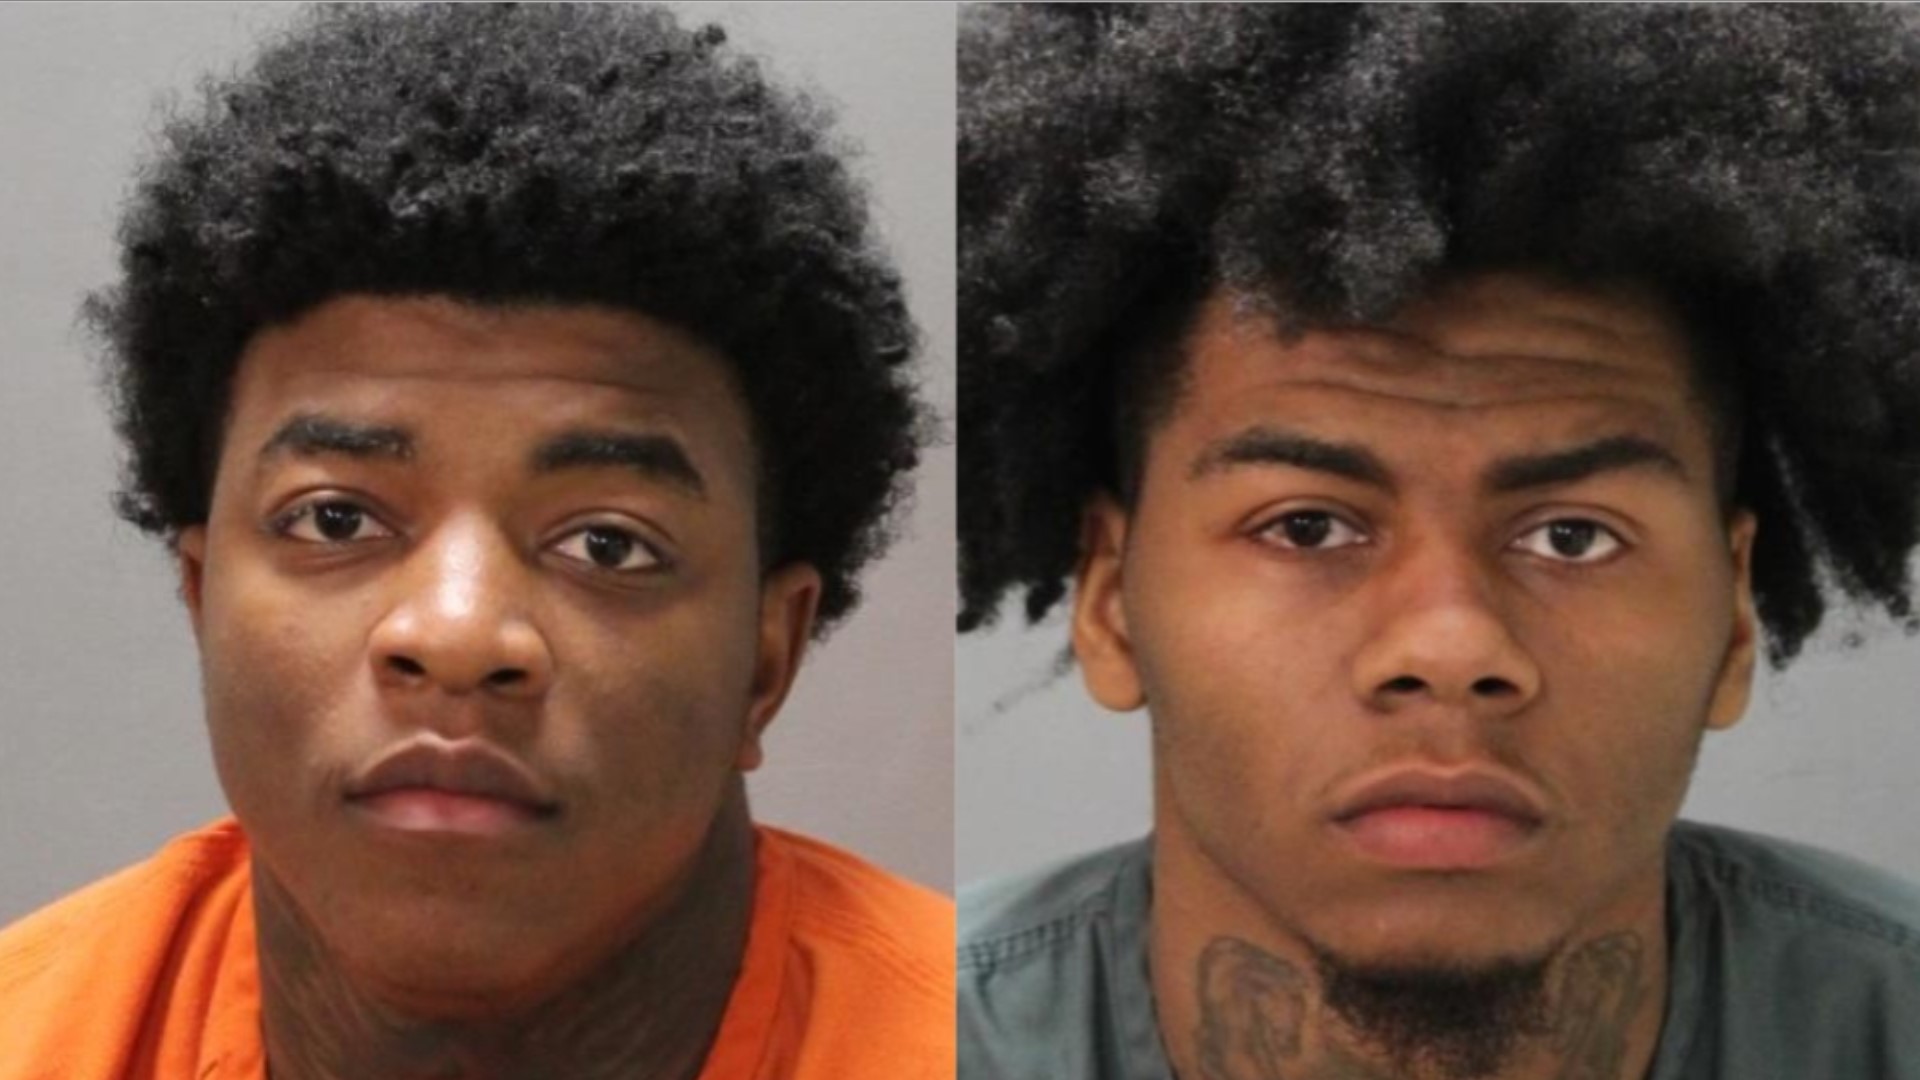 The men were arrested Monday night following a traffic stop in Jacksonville Beach. Ace was charged with gun possession. Quise was charged with driving/no license.